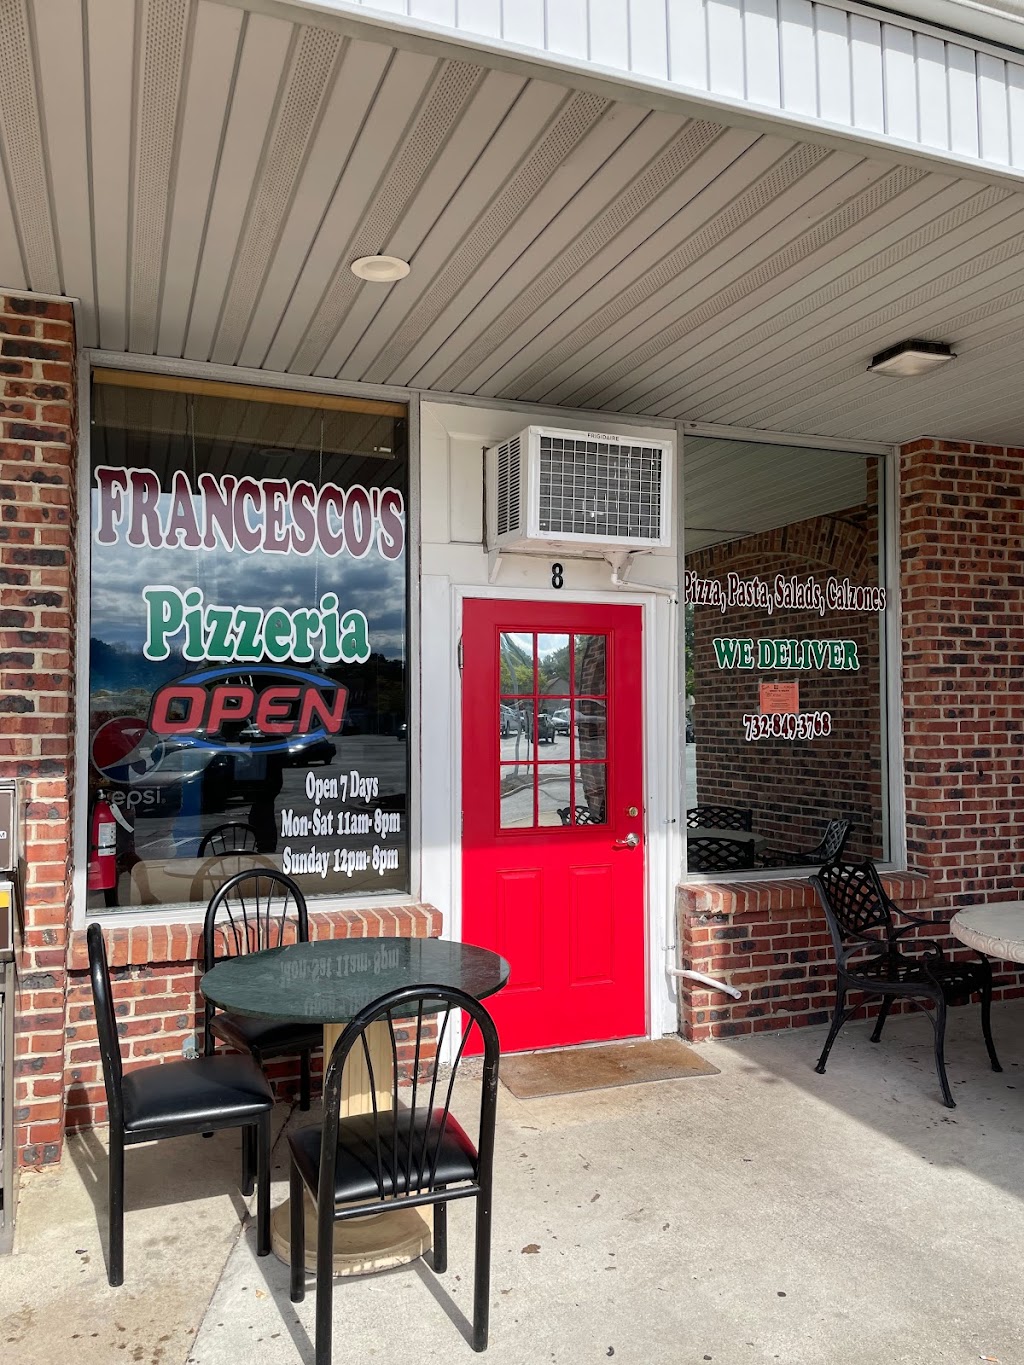 Francescos Pizzeria & Restaurant | 550 Count Rd. 530 The Crestwood Villlage, Shopping Center, 550 County Rd 530, Manchester Township, NJ 08759 | Phone: (732) 849-3768